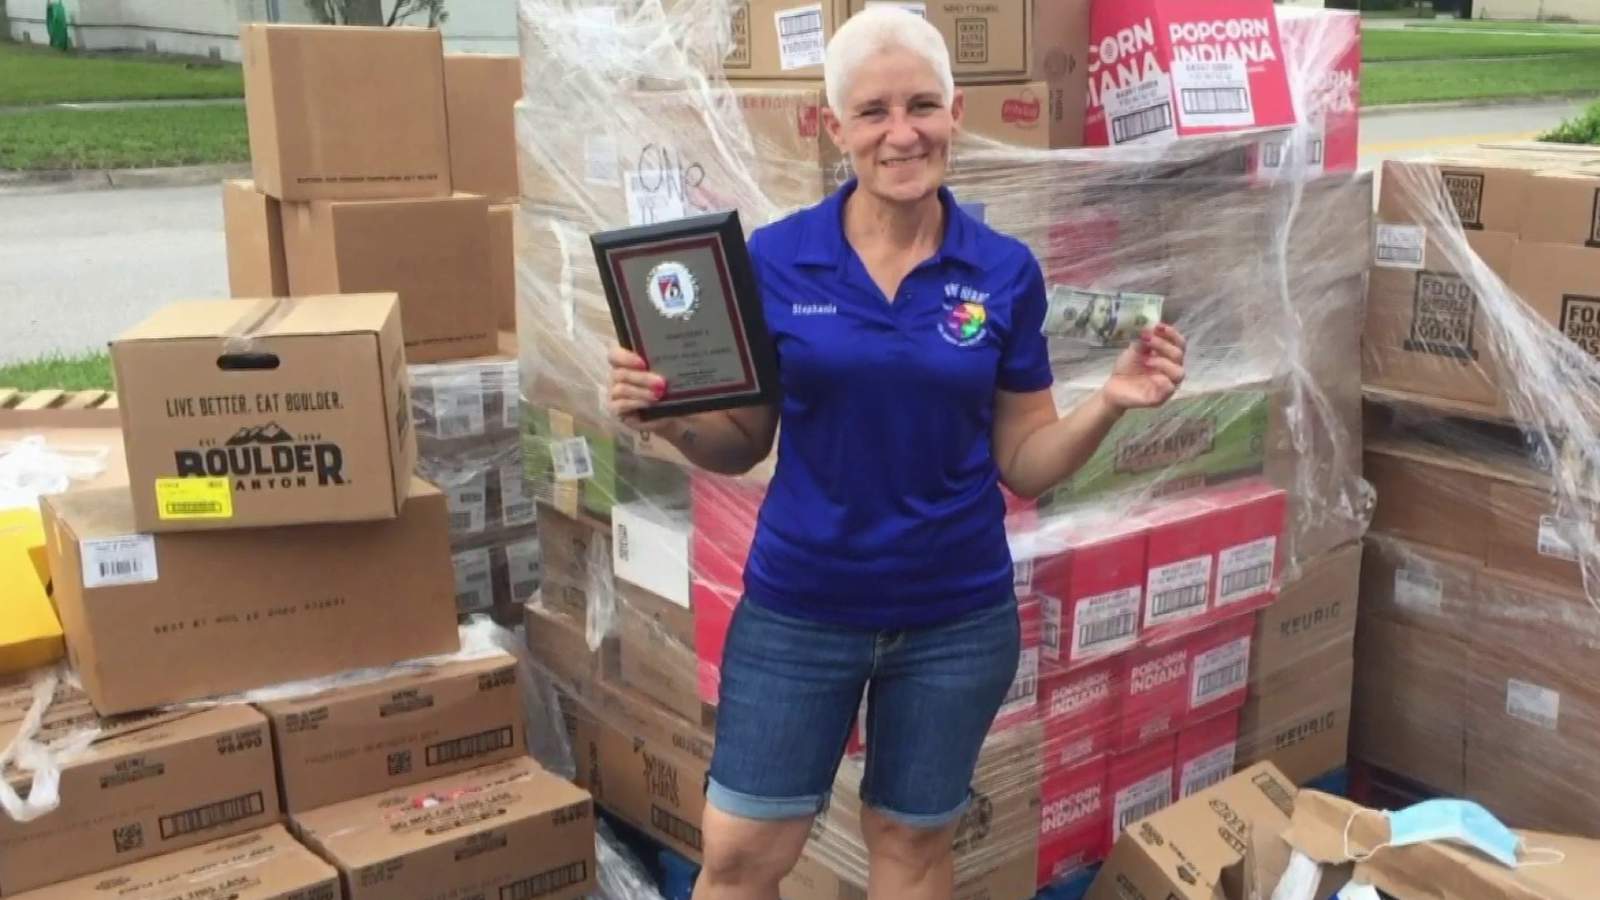 ‘We’re all in it together:' Orlando food pantry meets increasing need